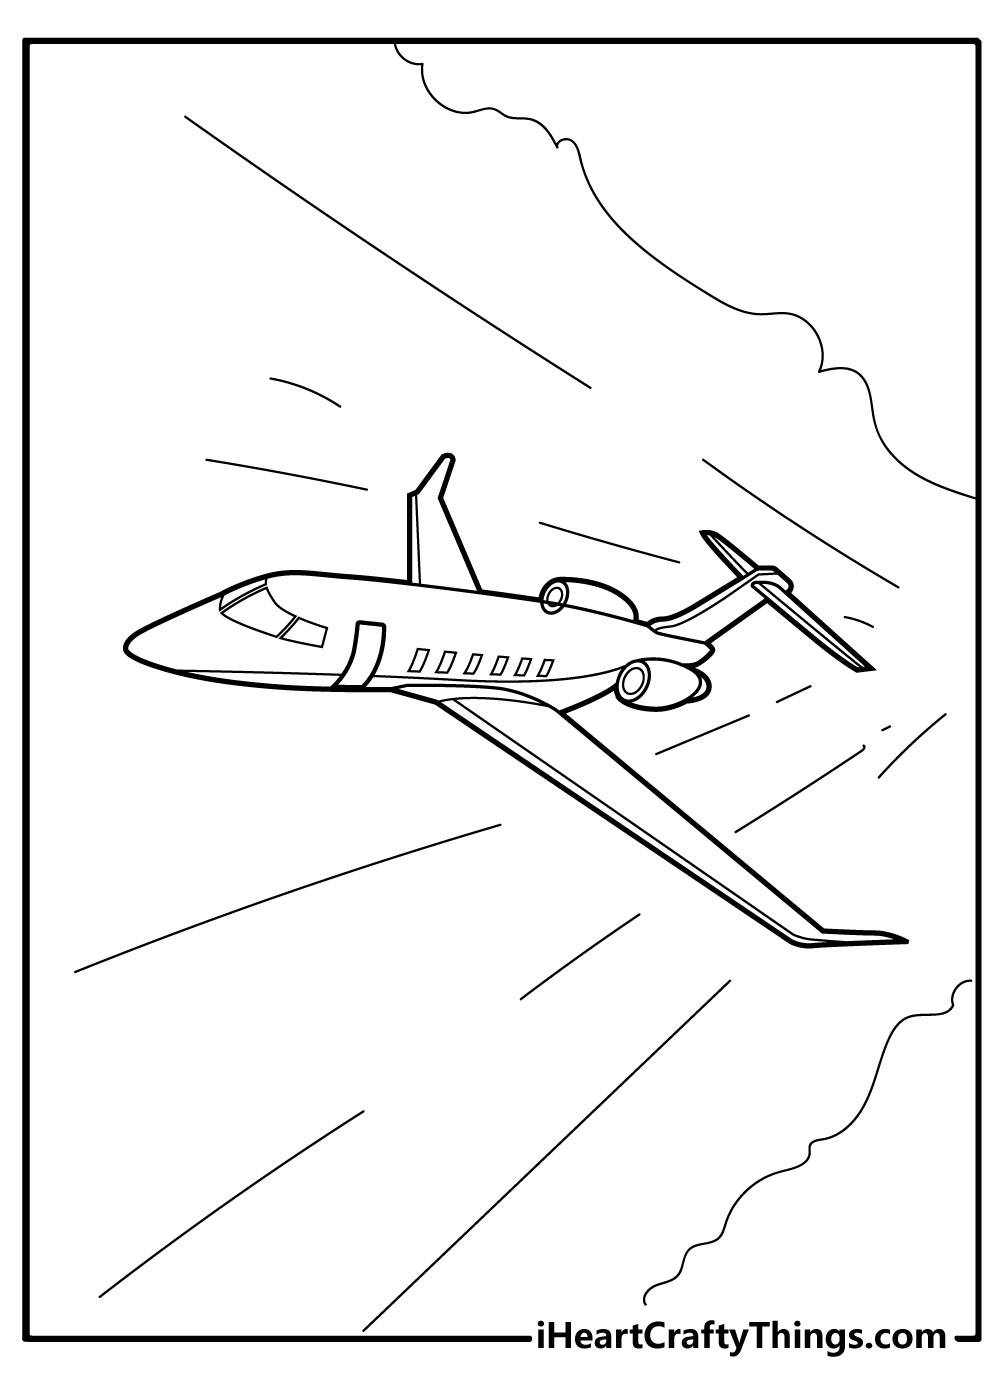 new Airplane Coloring Pages free download